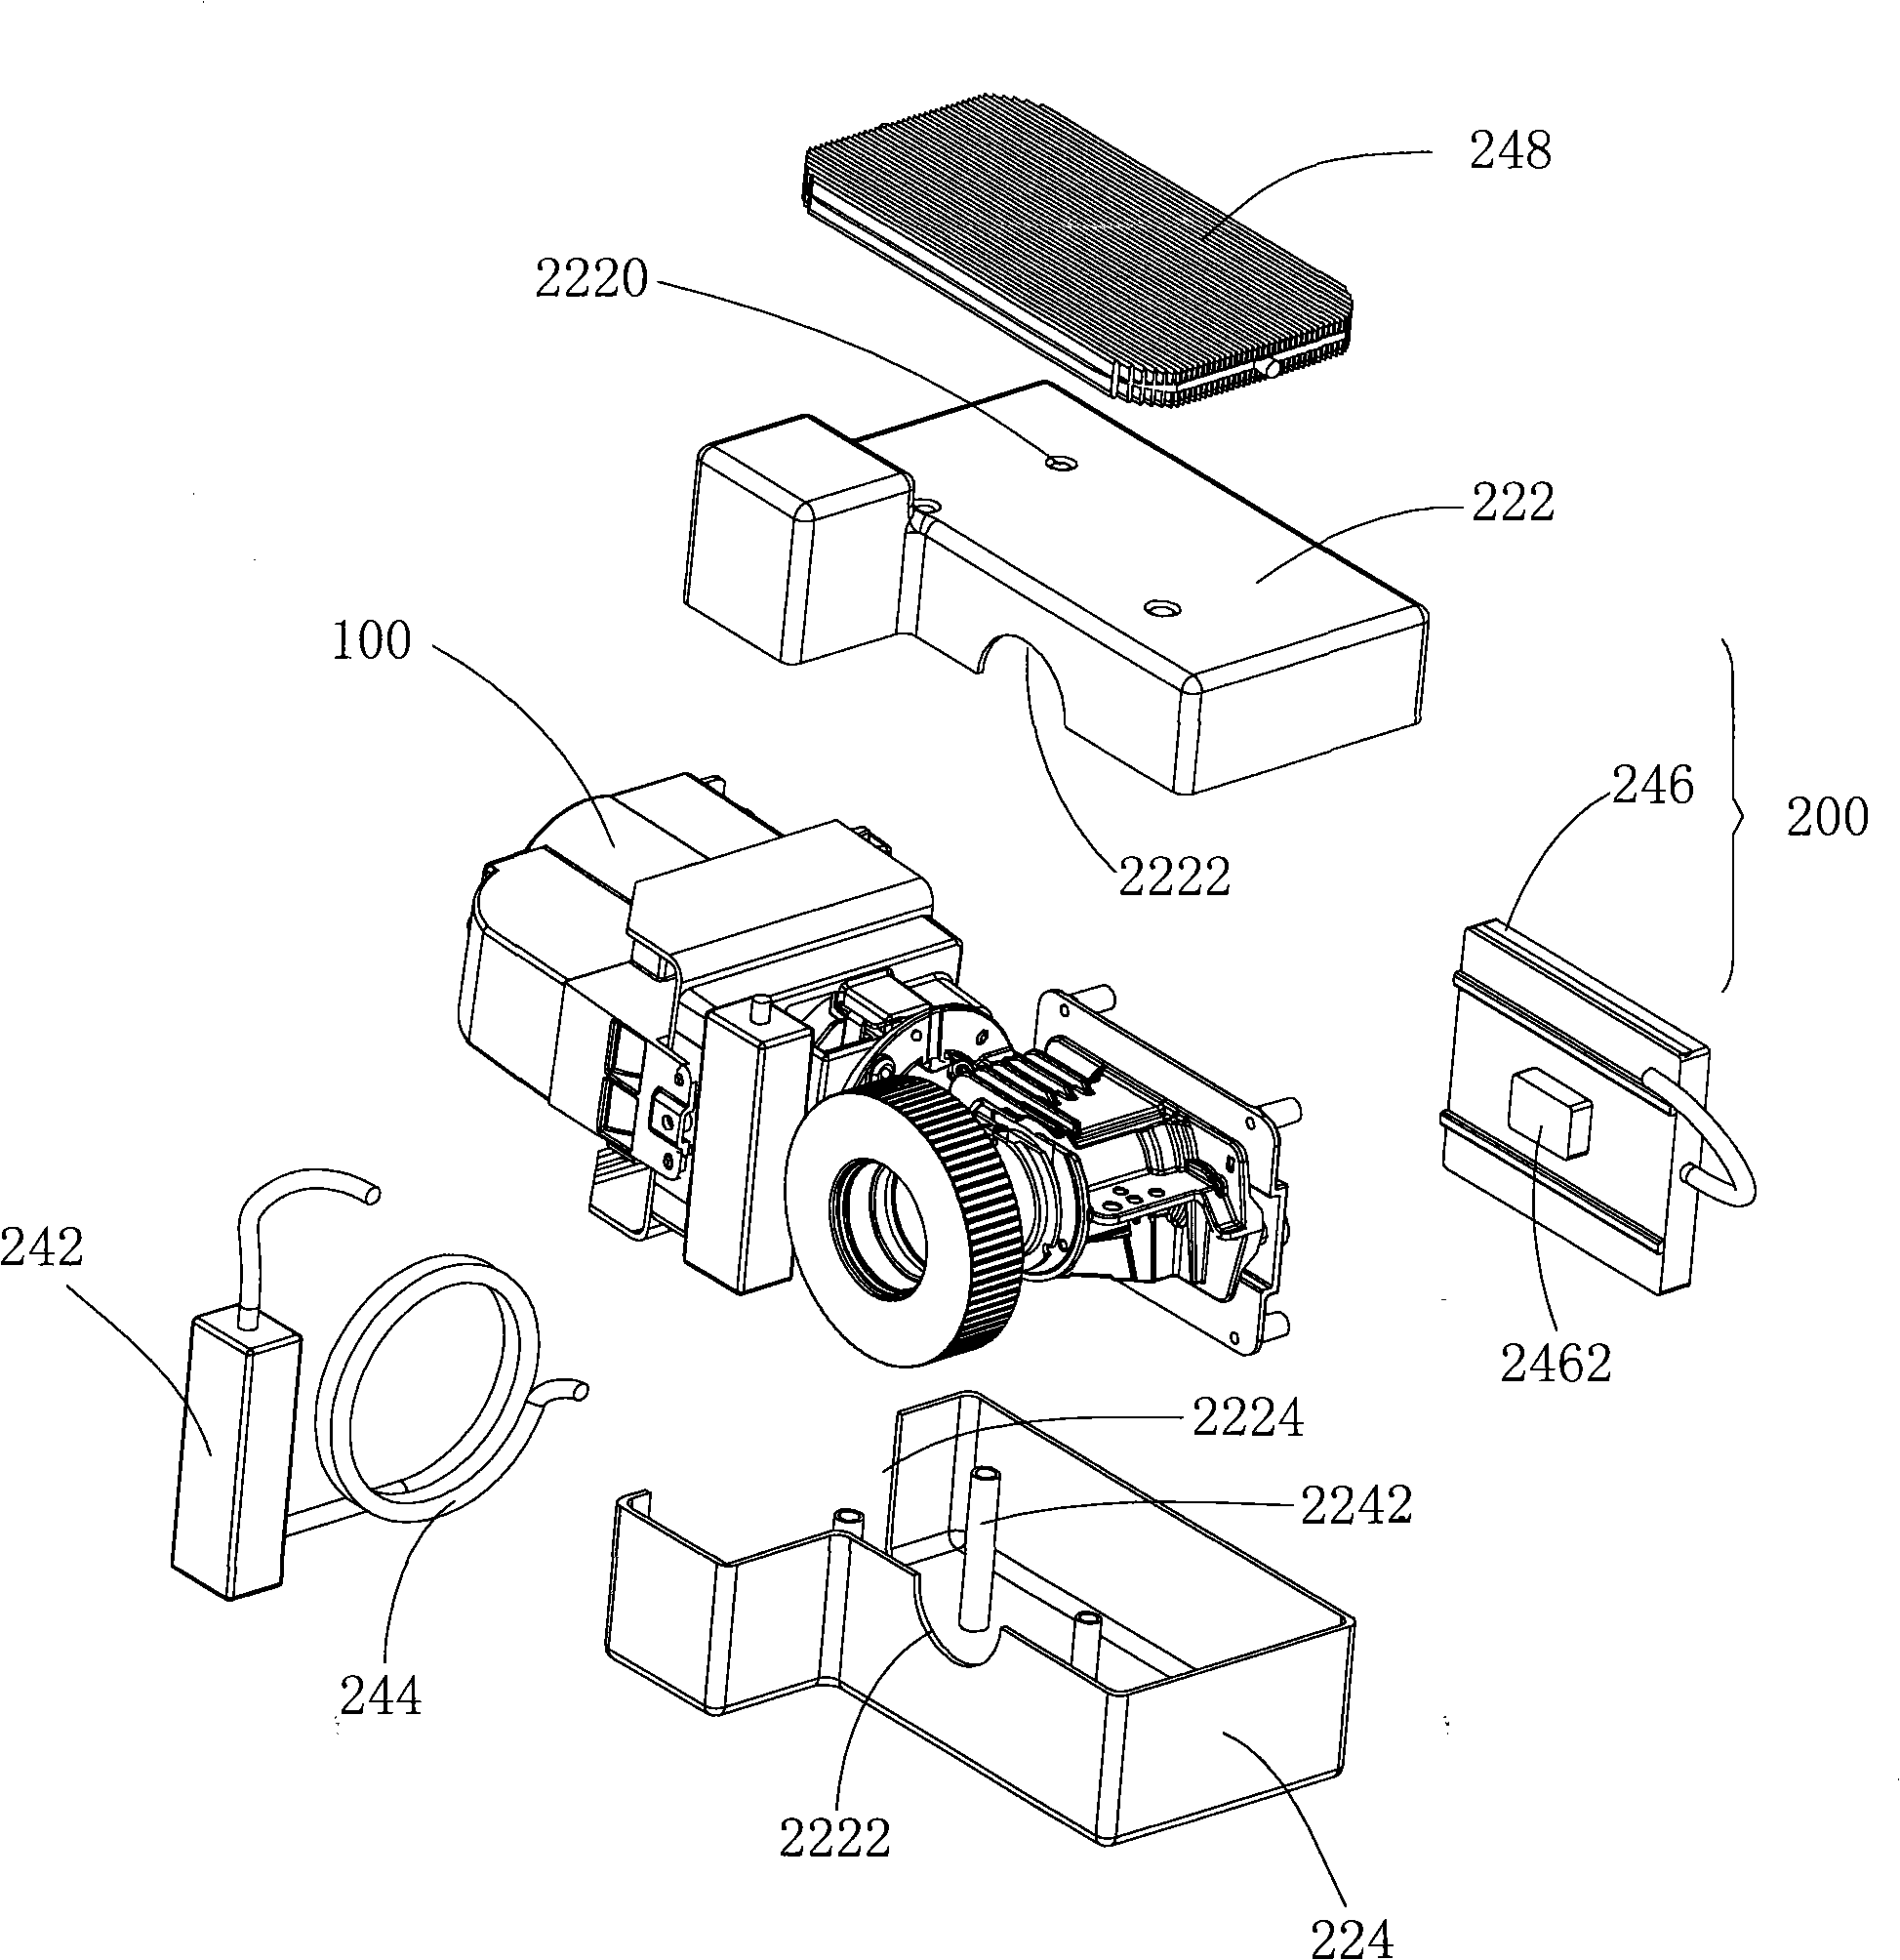 Liquid cooling and heat dissipating system for digital light processing (DLP) projector